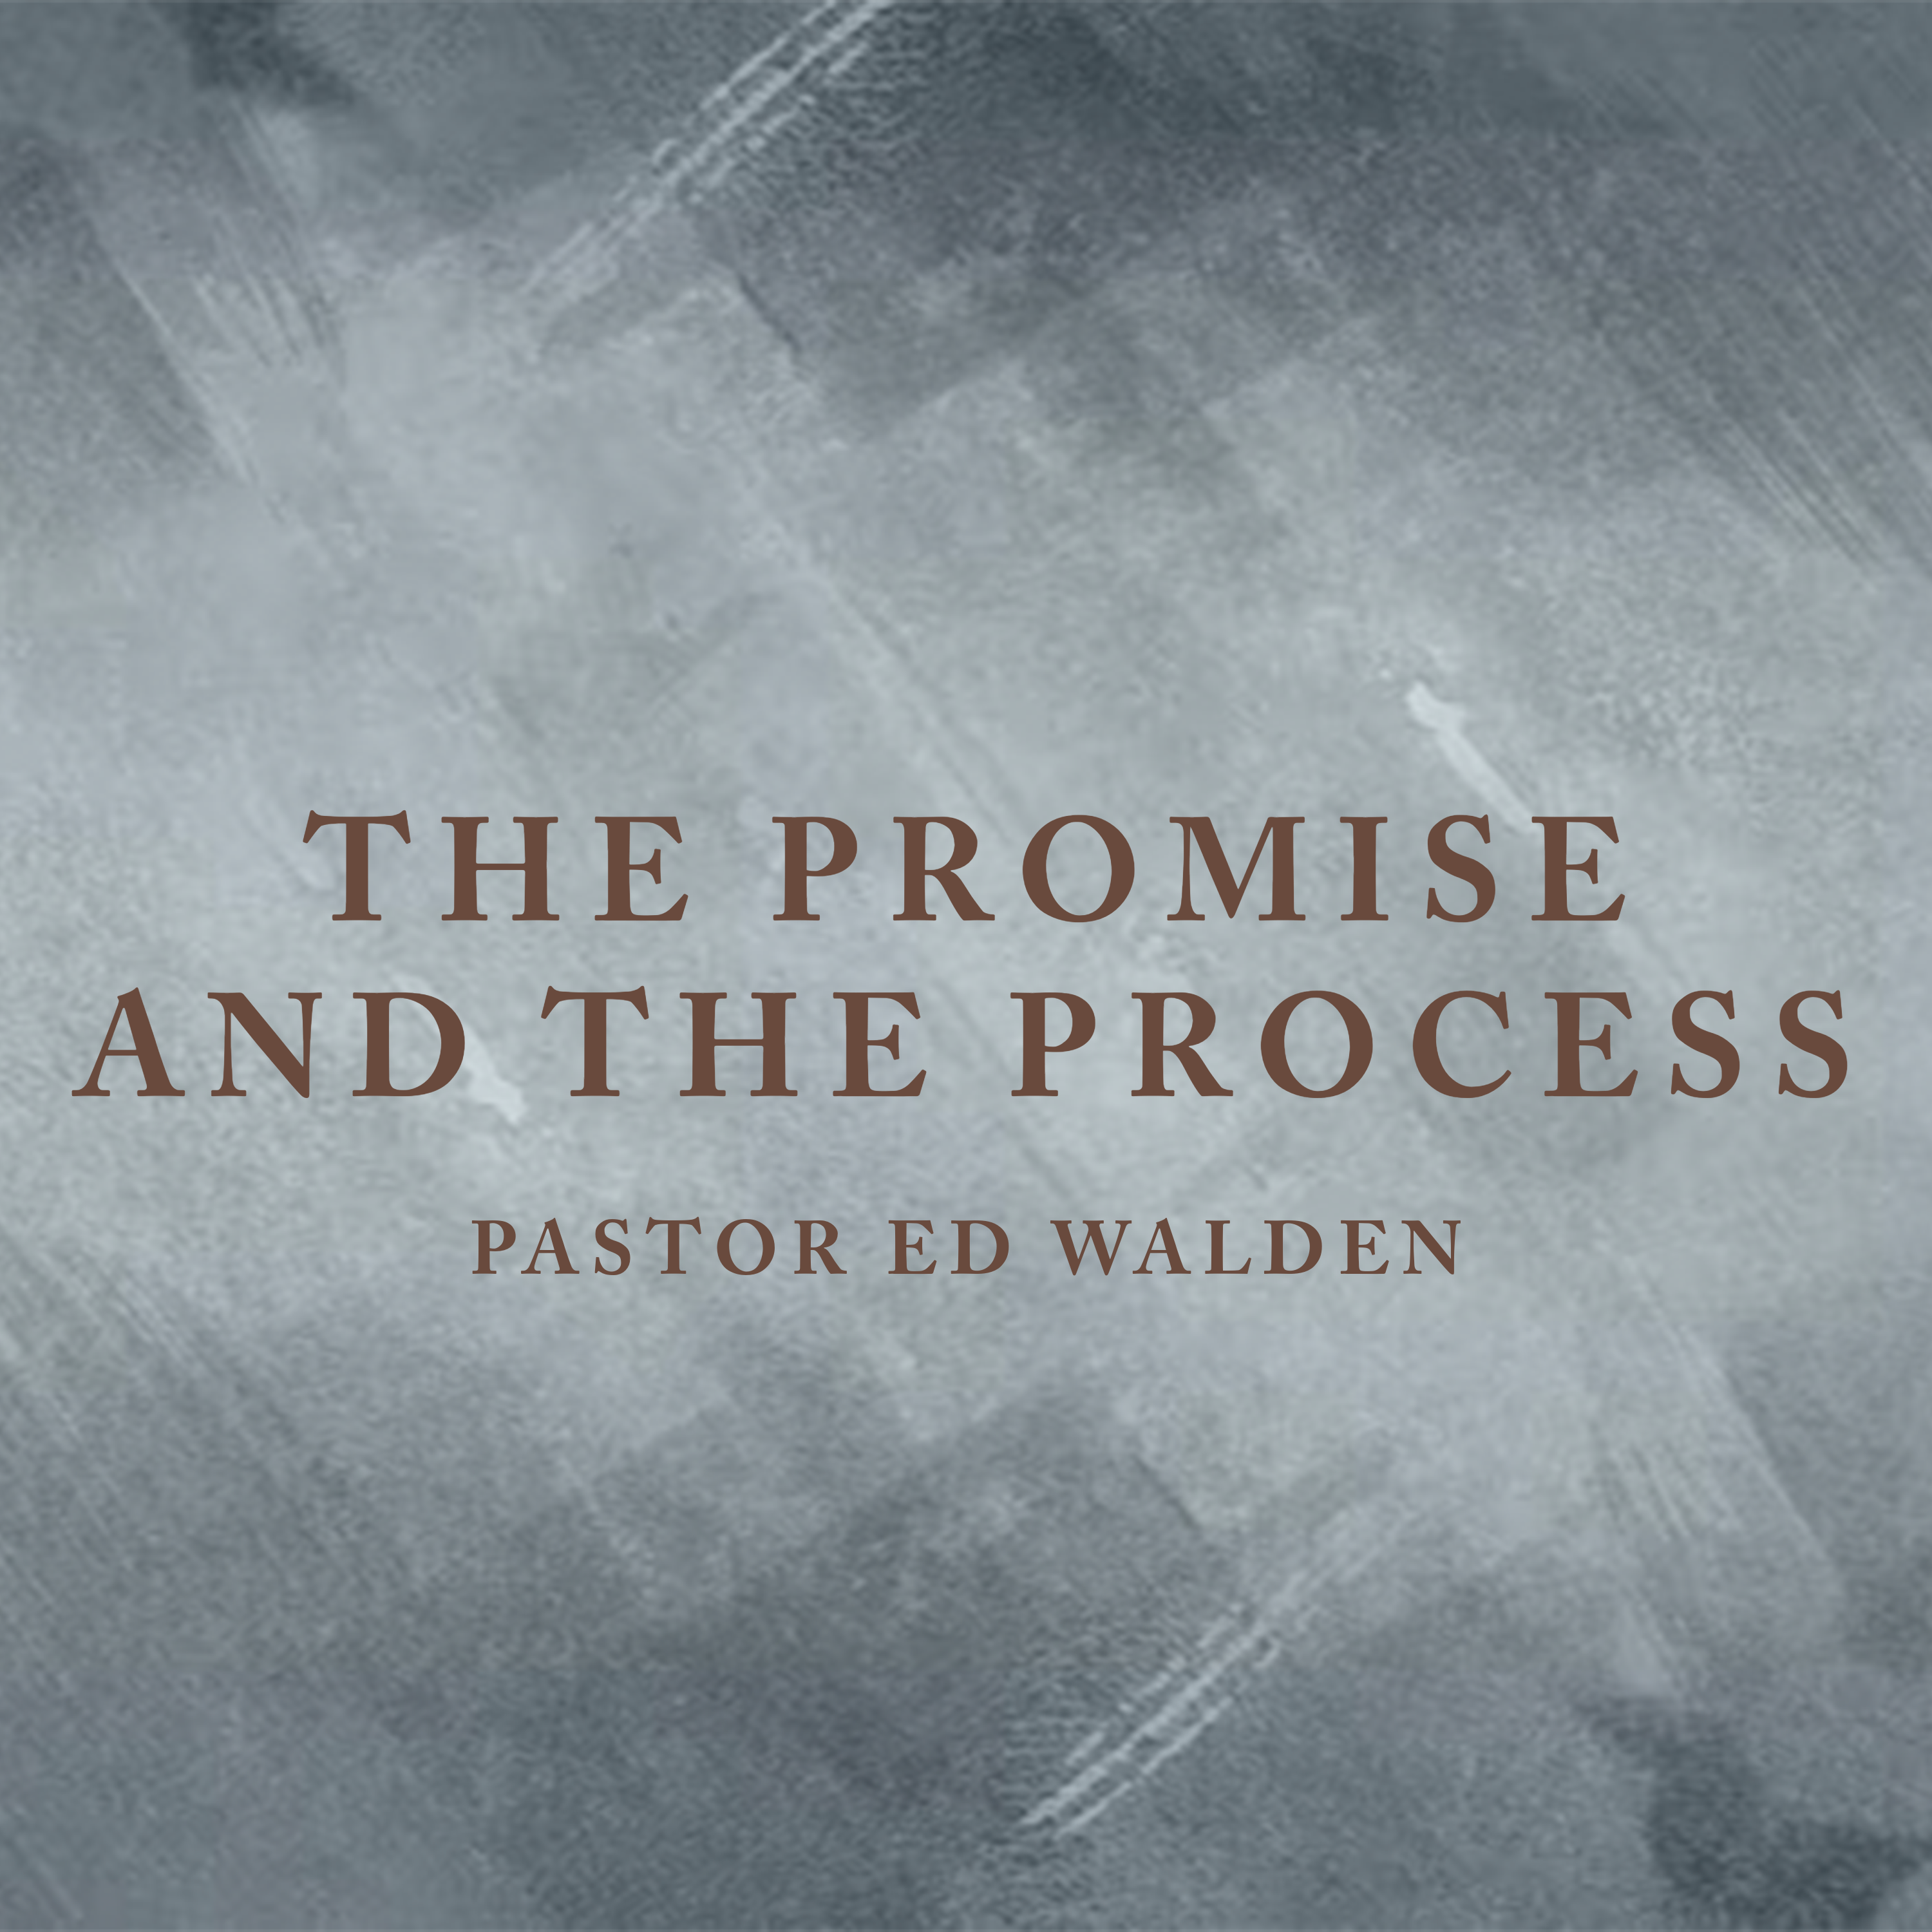 The Promise and The Process